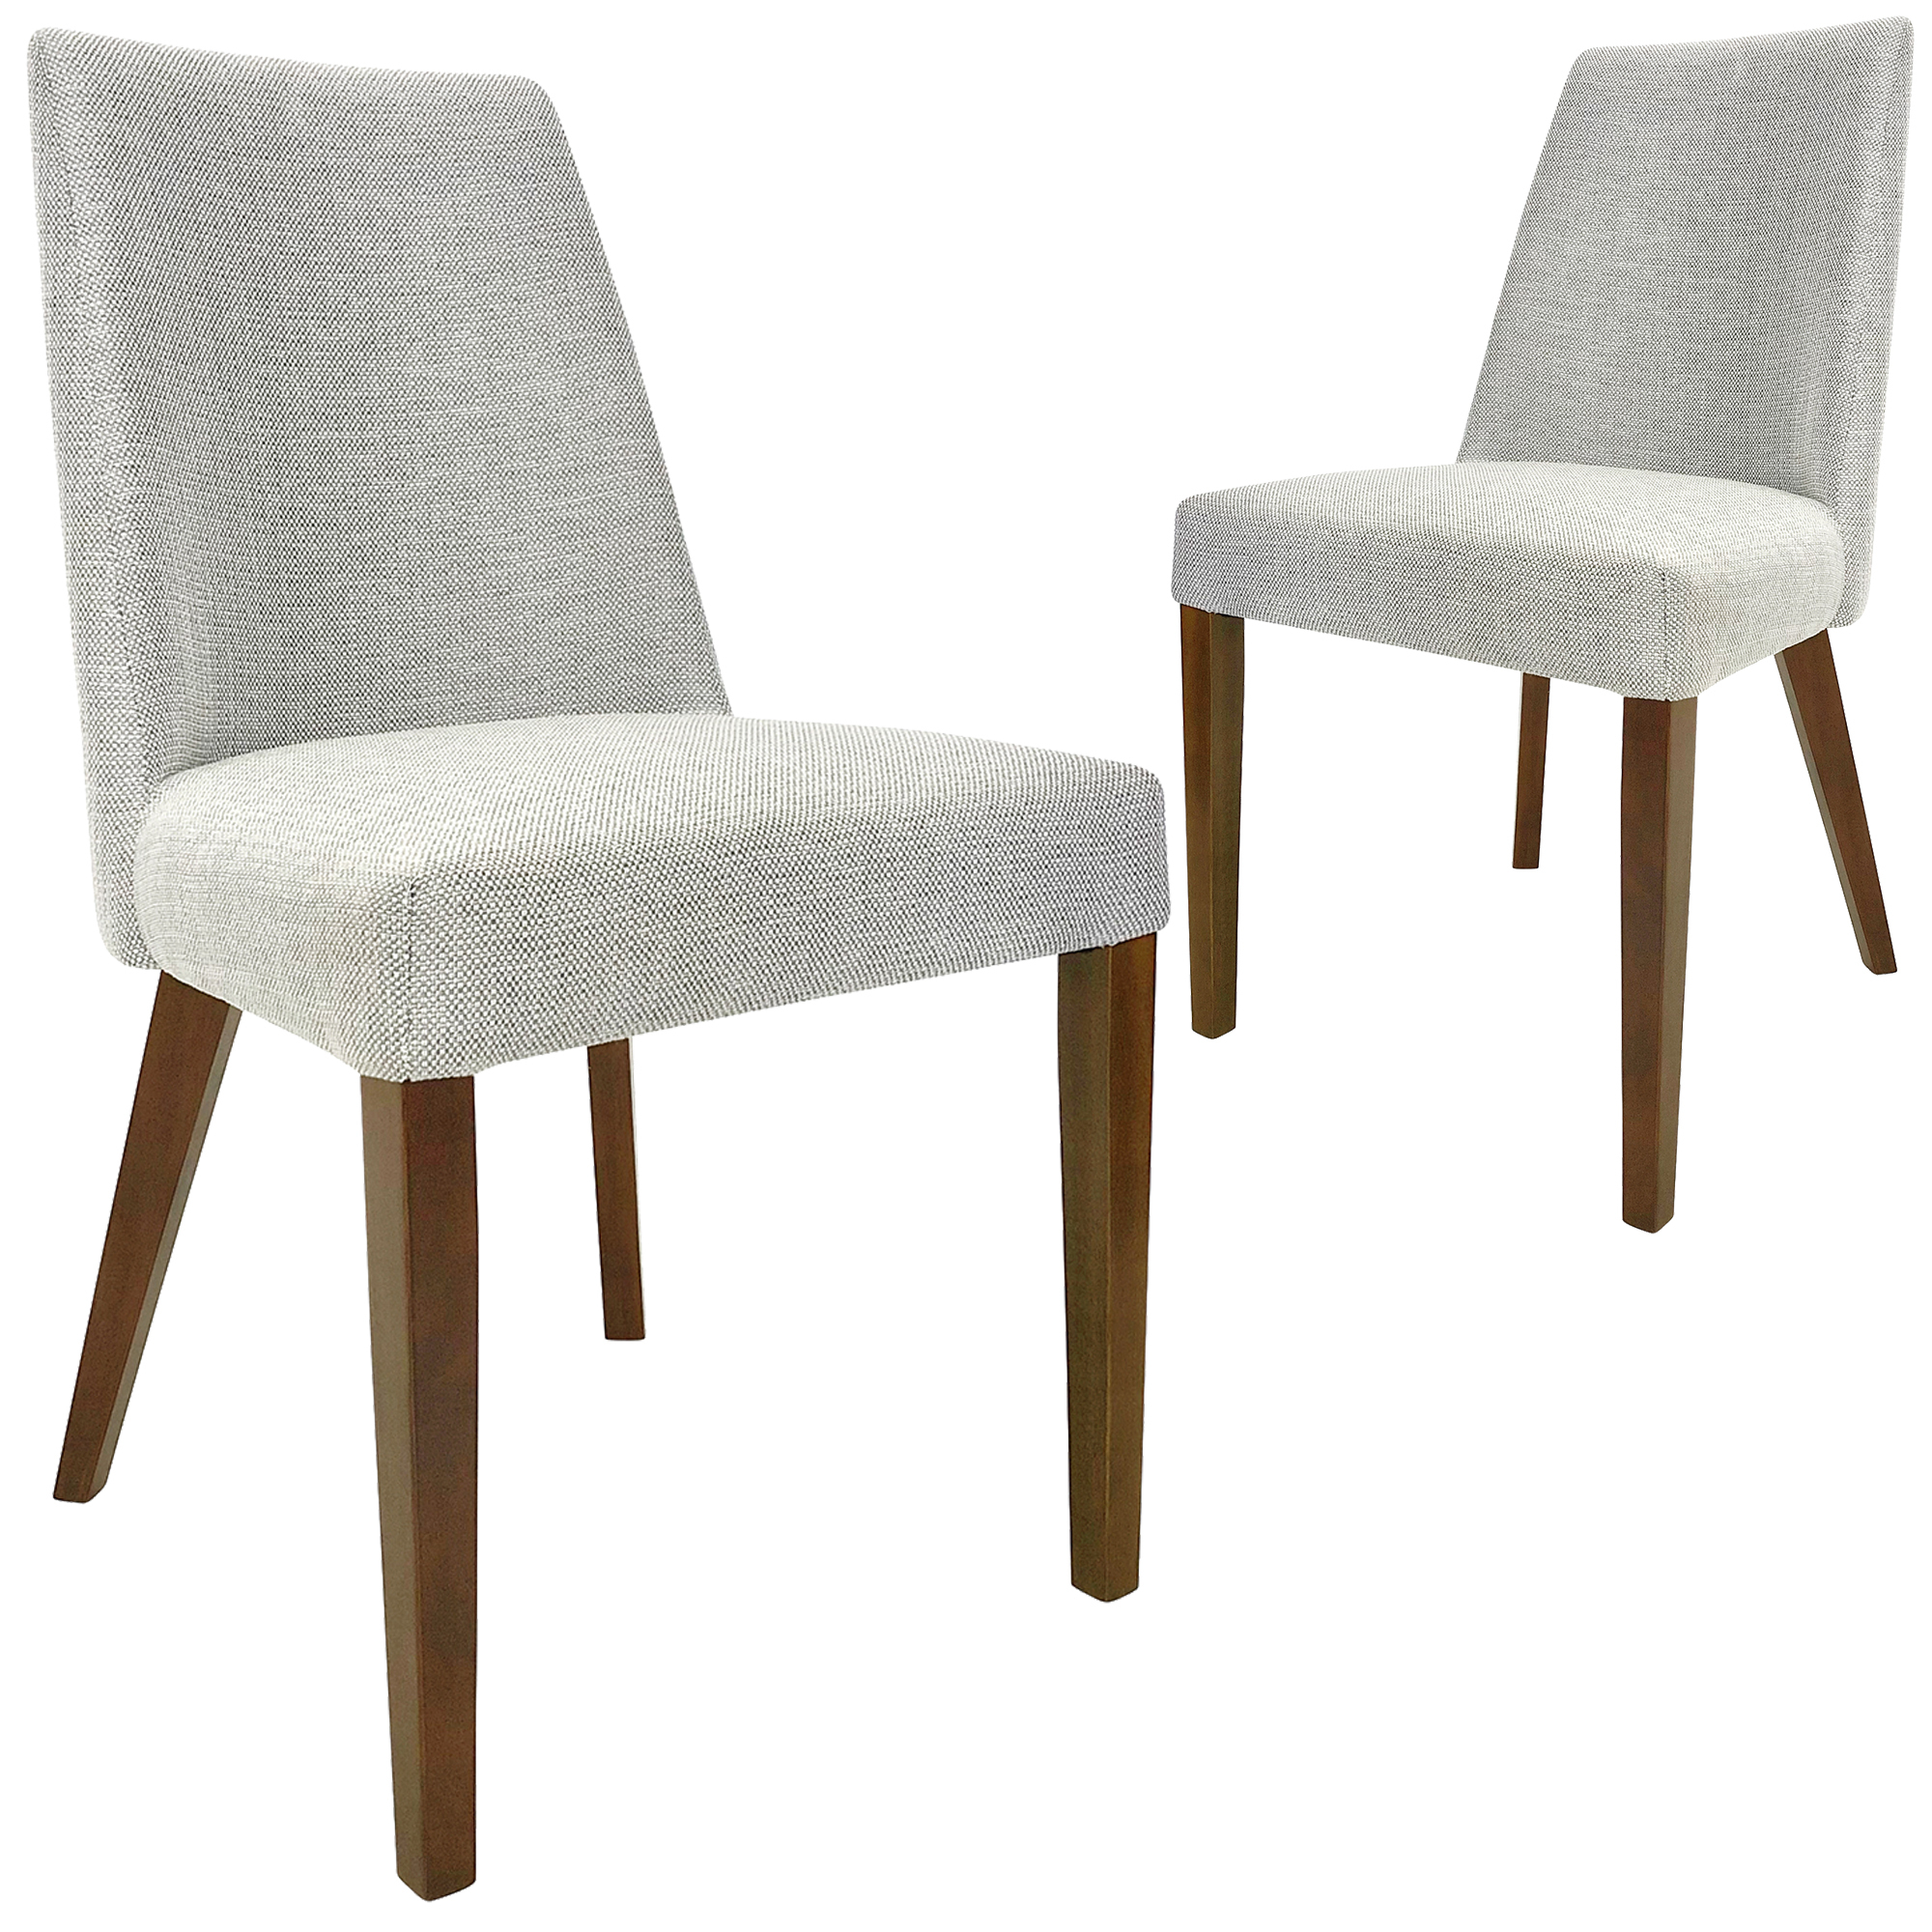 S Kelian Upholstered Dining Chairs, Hamilton Dining Chair